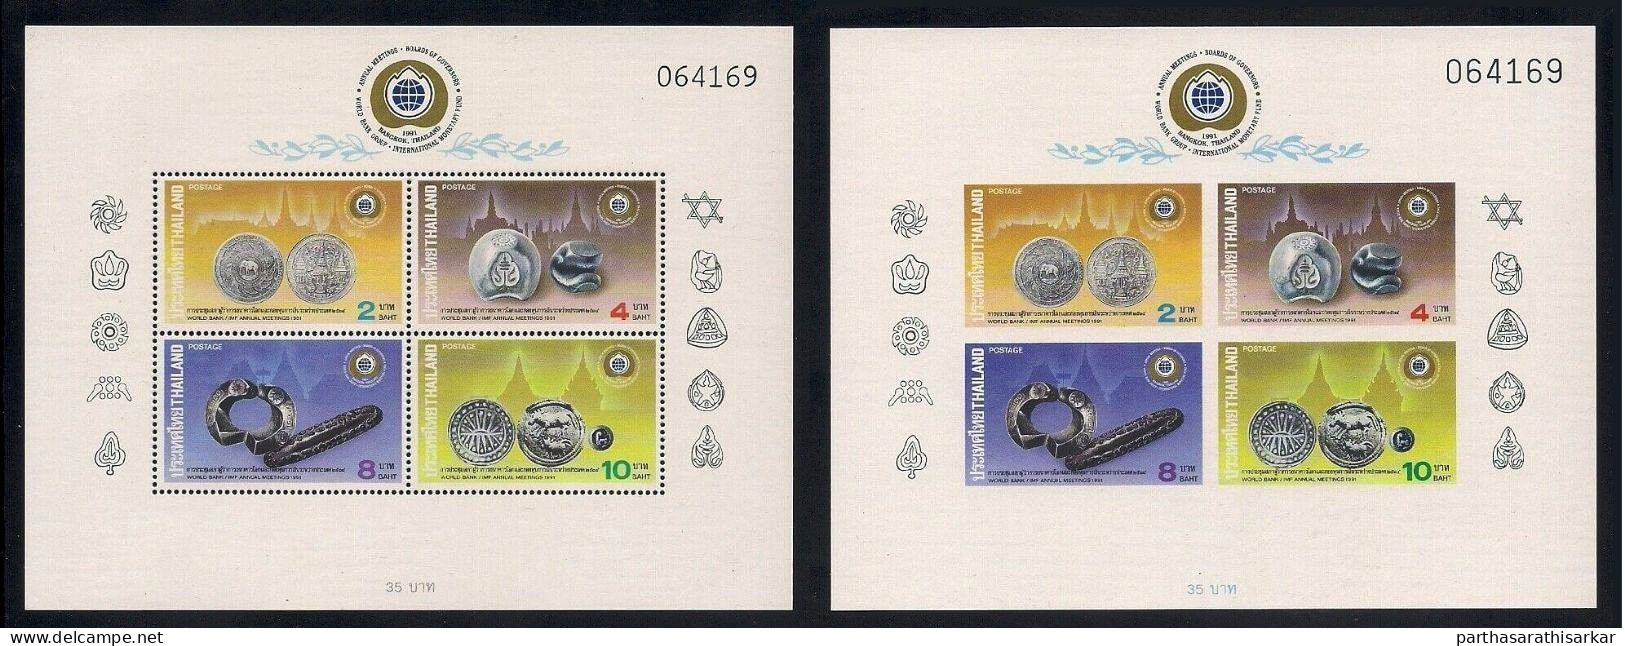 THAILAND 1991 ANCIENT COINAGE COINS PERF IMPERF SAME NO MINIATURE SHEET MS SET MNH - Munten